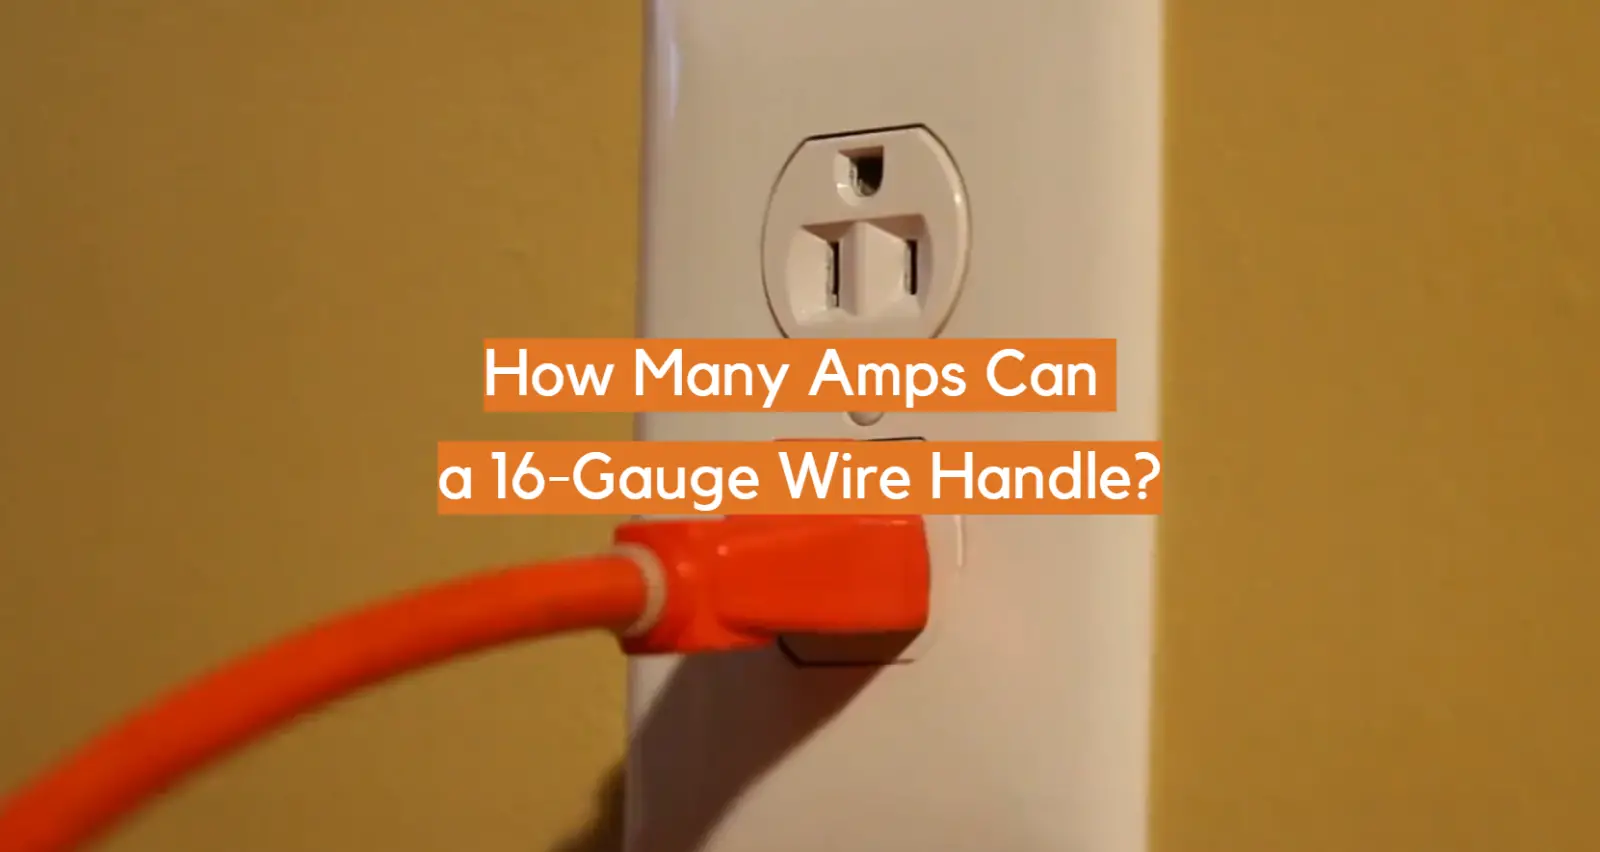 How Many Amps Can a 16-Gauge Wire Handle?